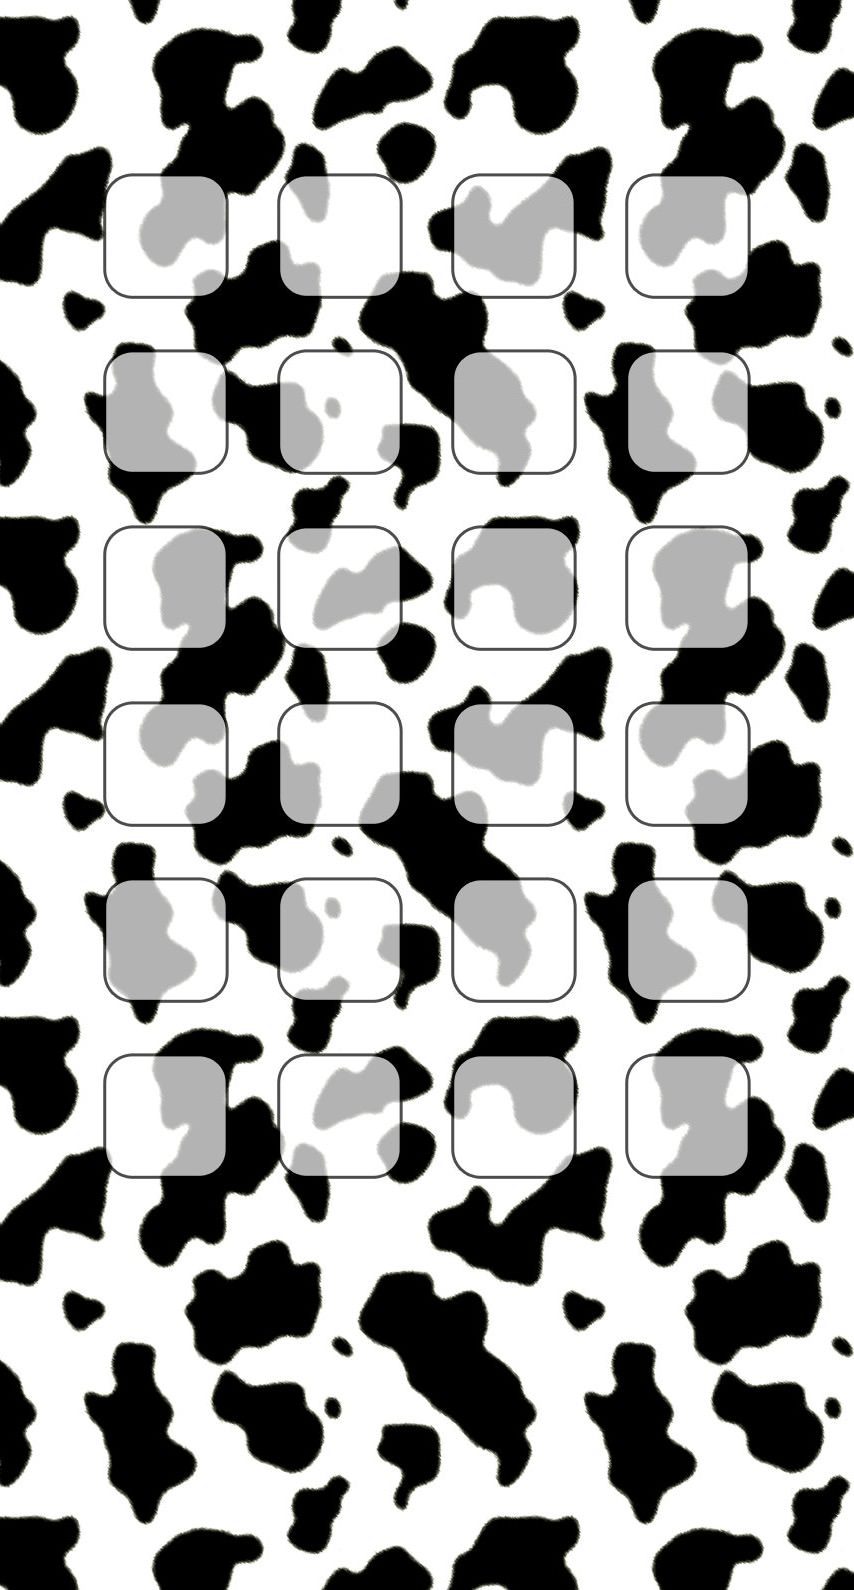 Black-and-white cow pattern shelf | wallpaper.sc iPhone8